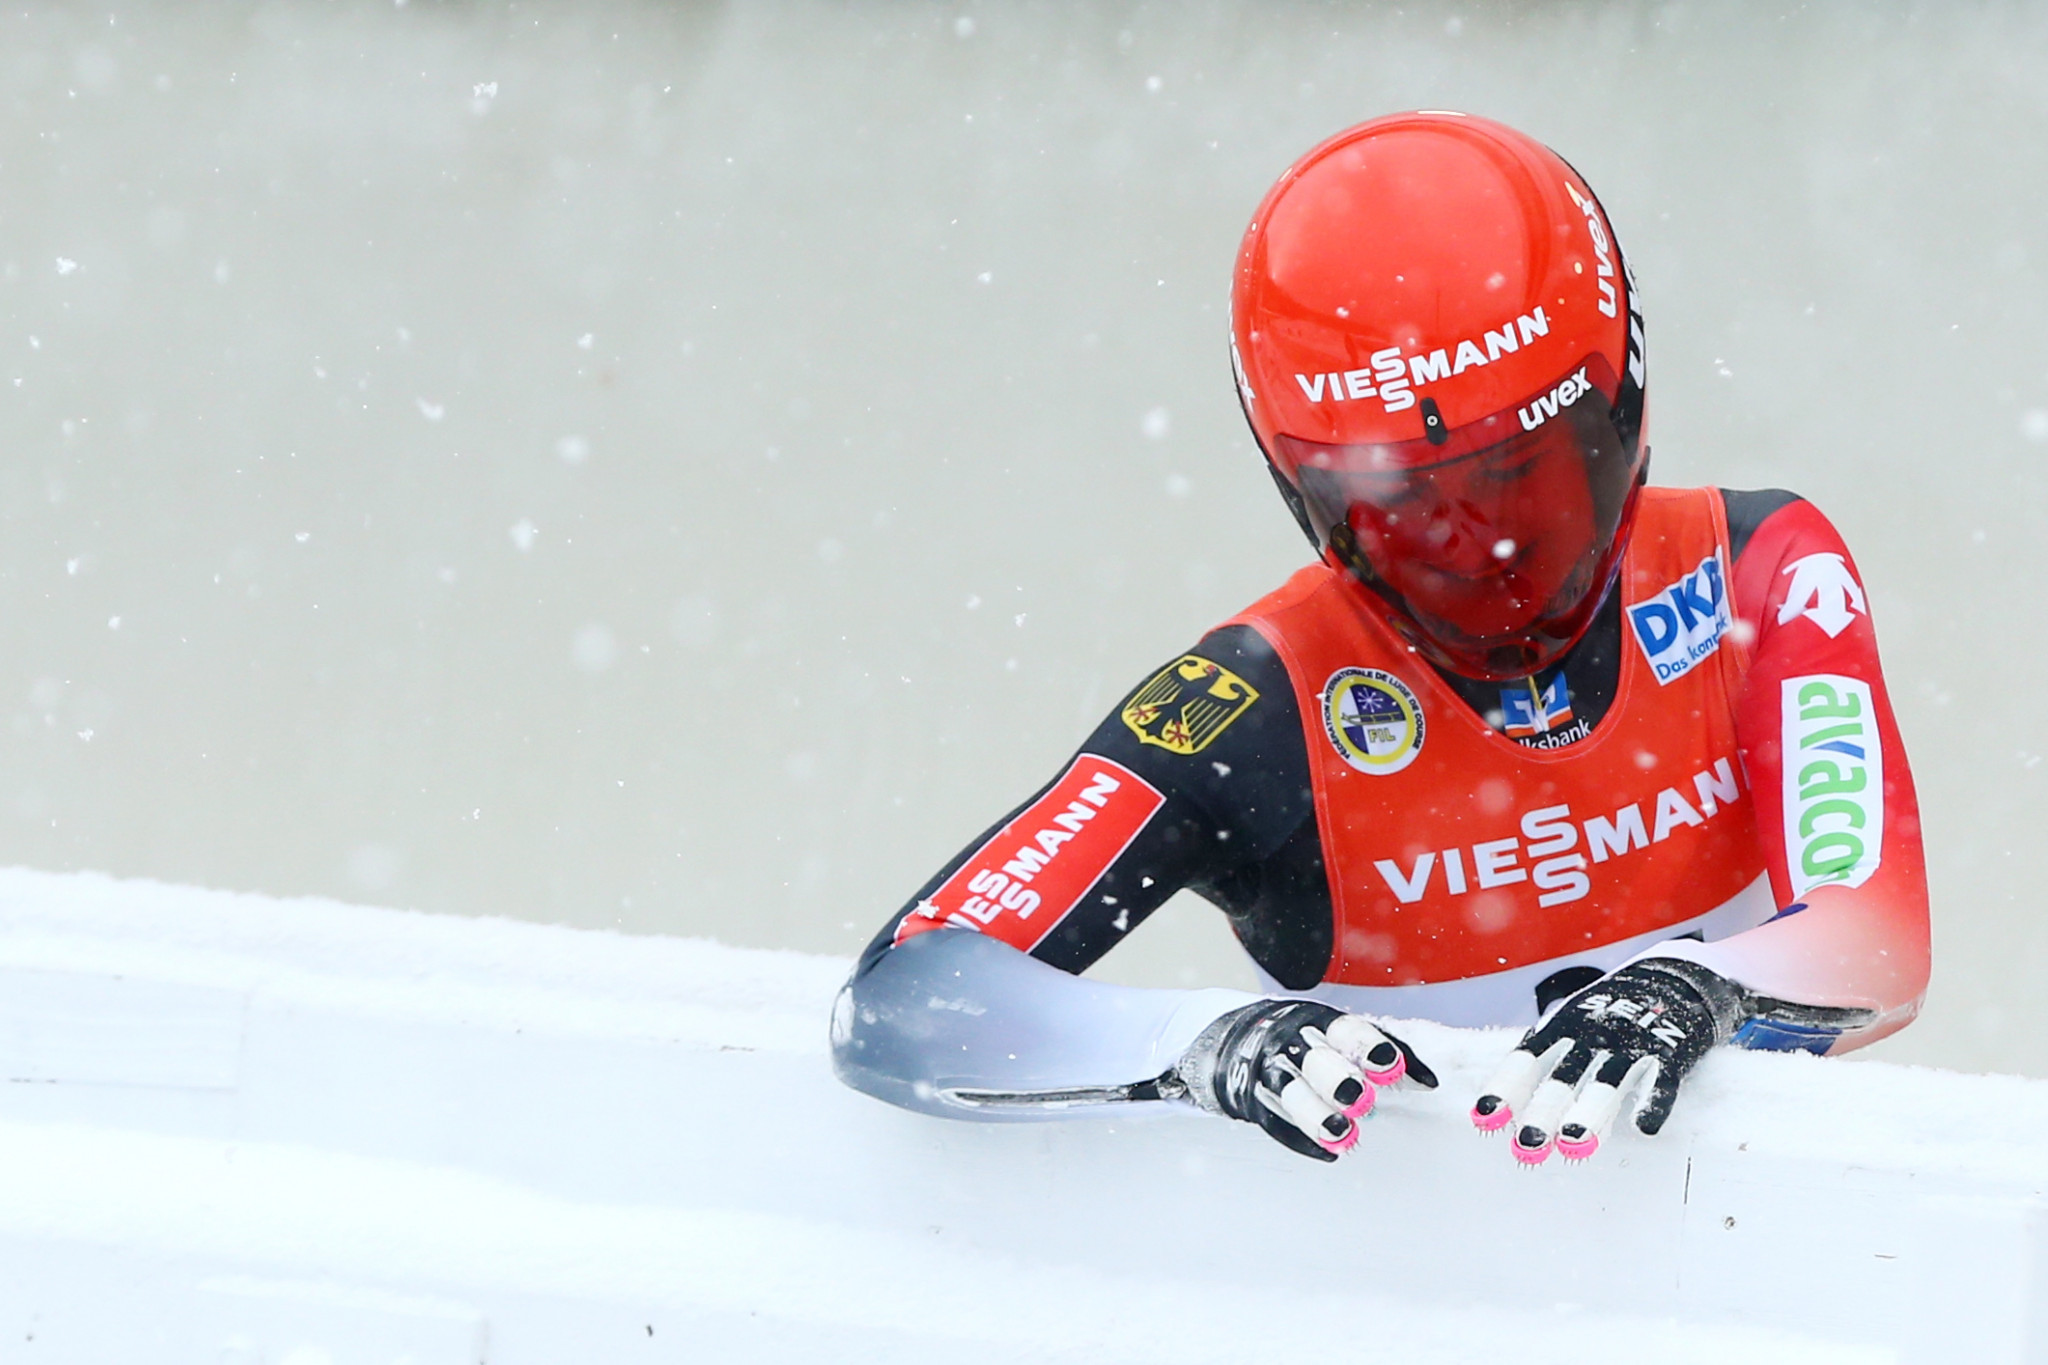 Julia Taubitz celebrated victory at the Luge World Cup in Königssee ©Getty Images